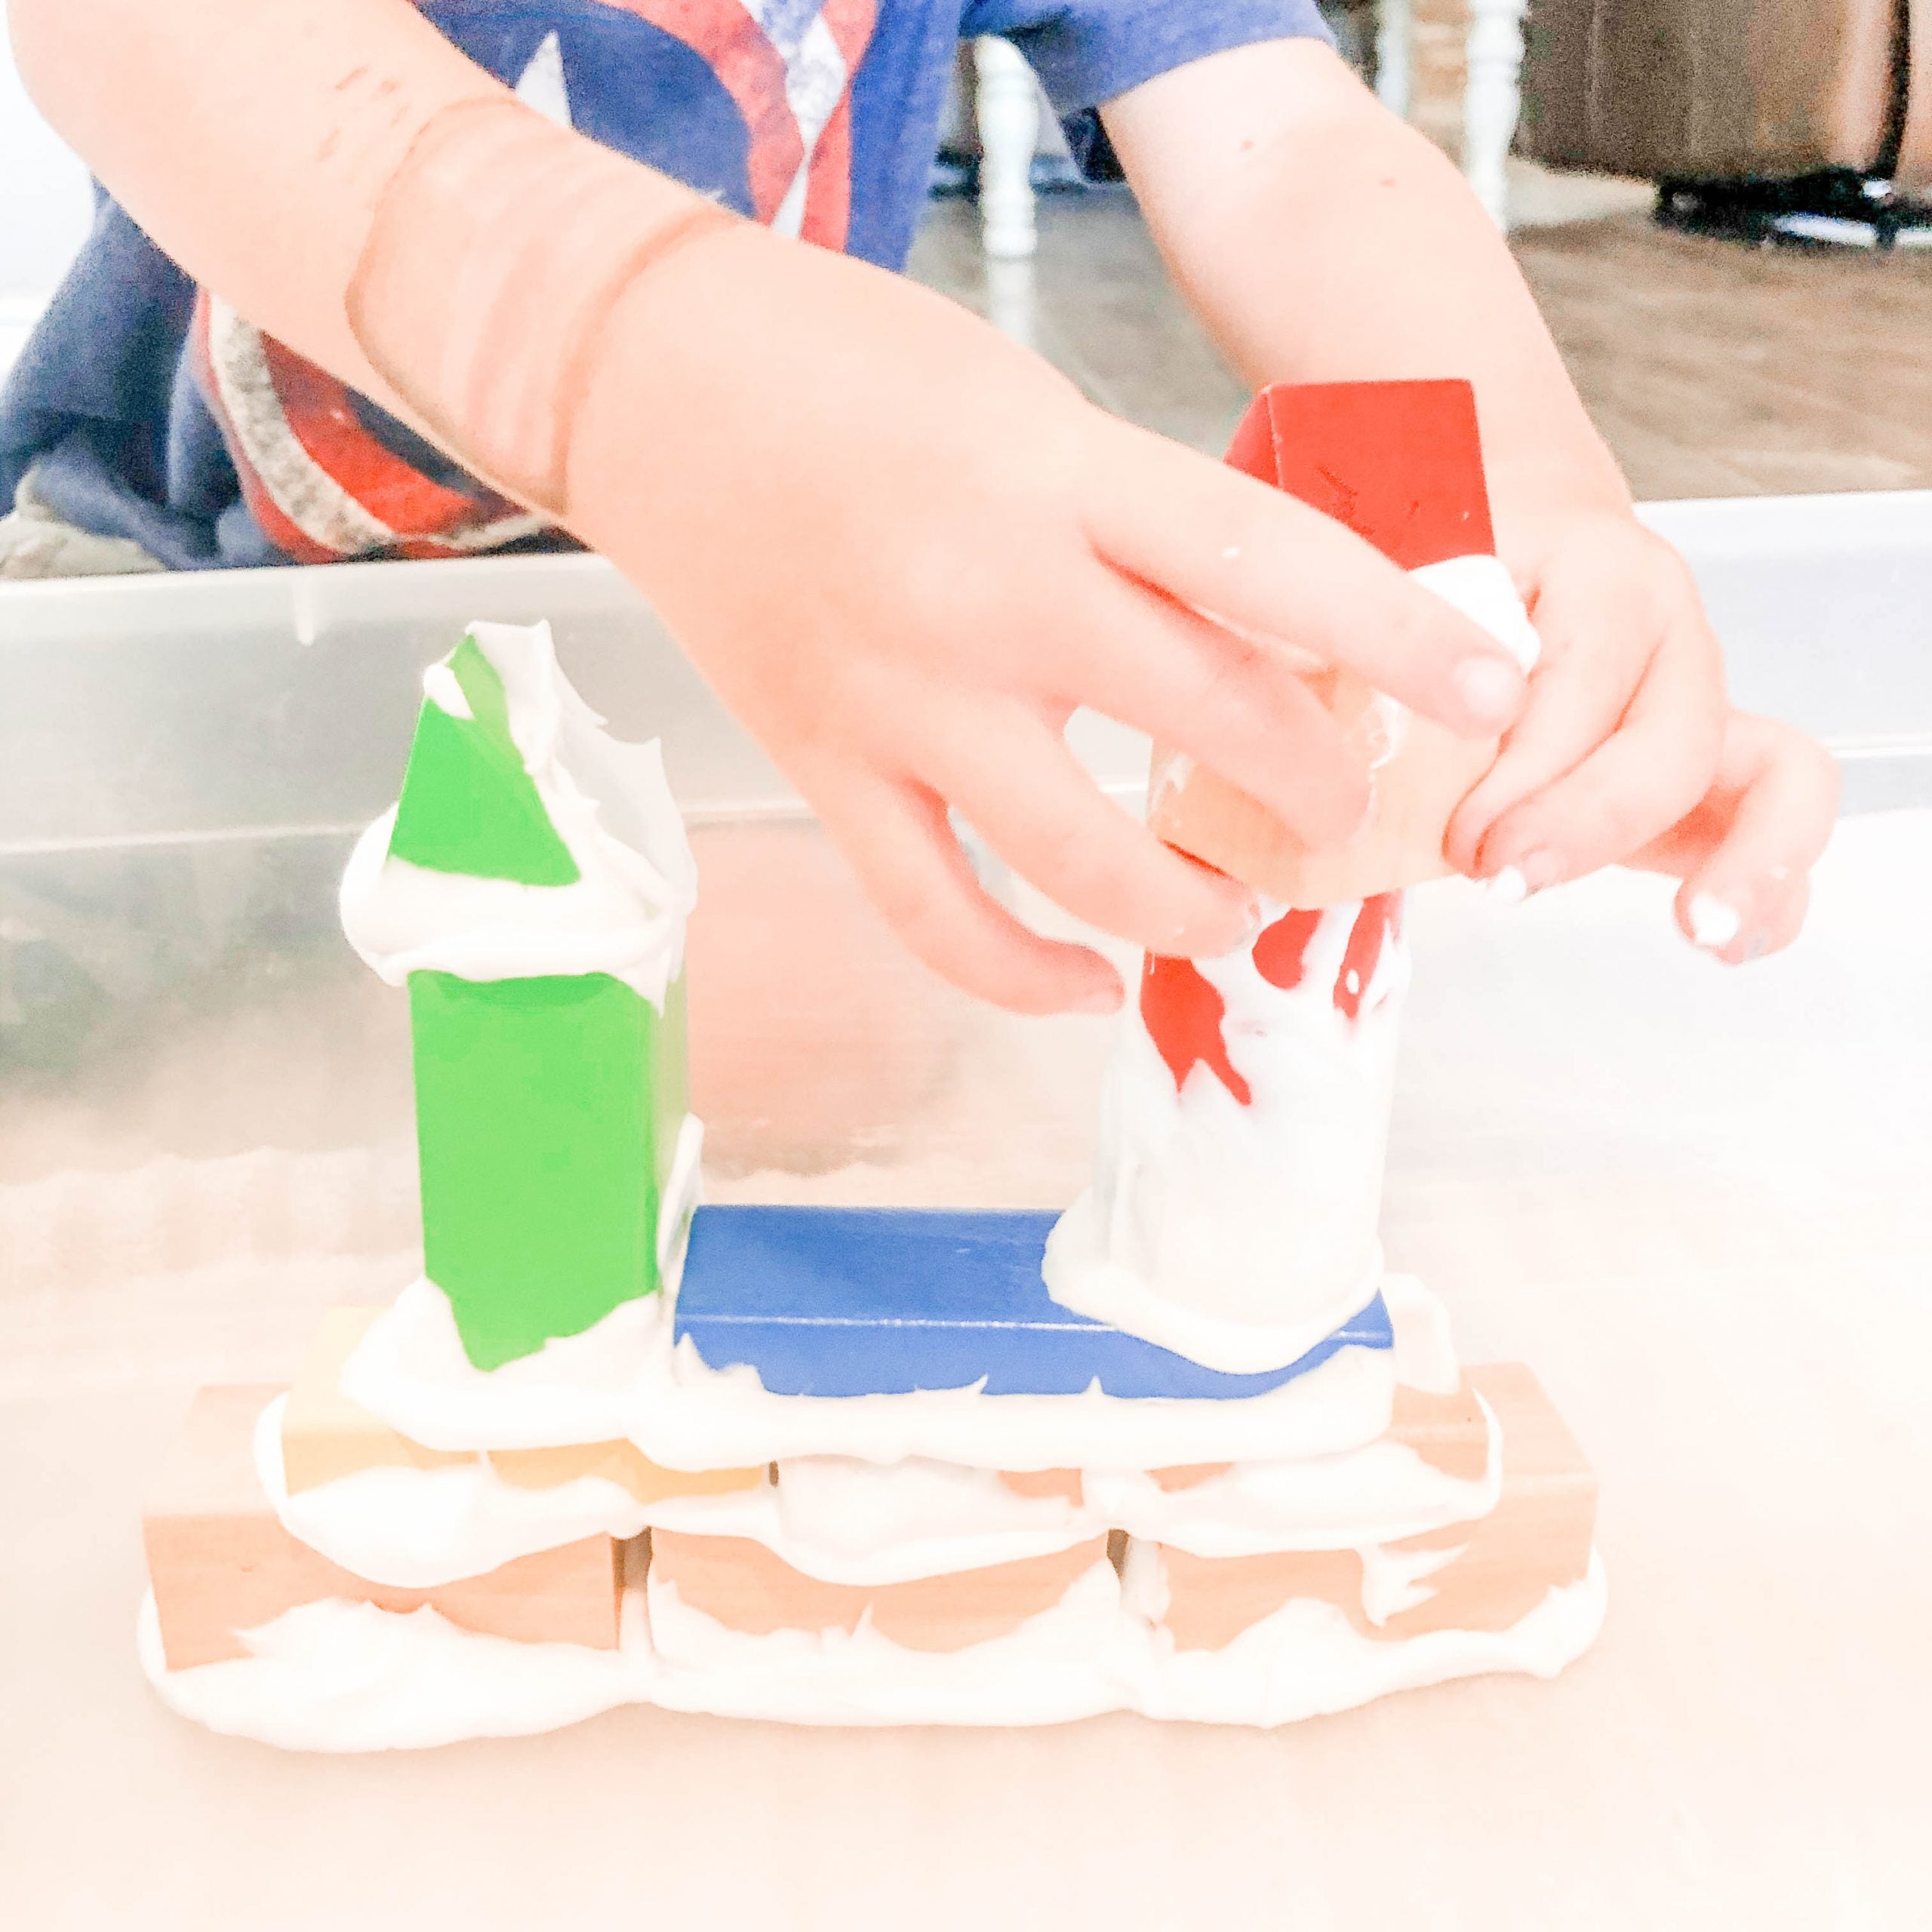 boy building with blocks and shaving cream